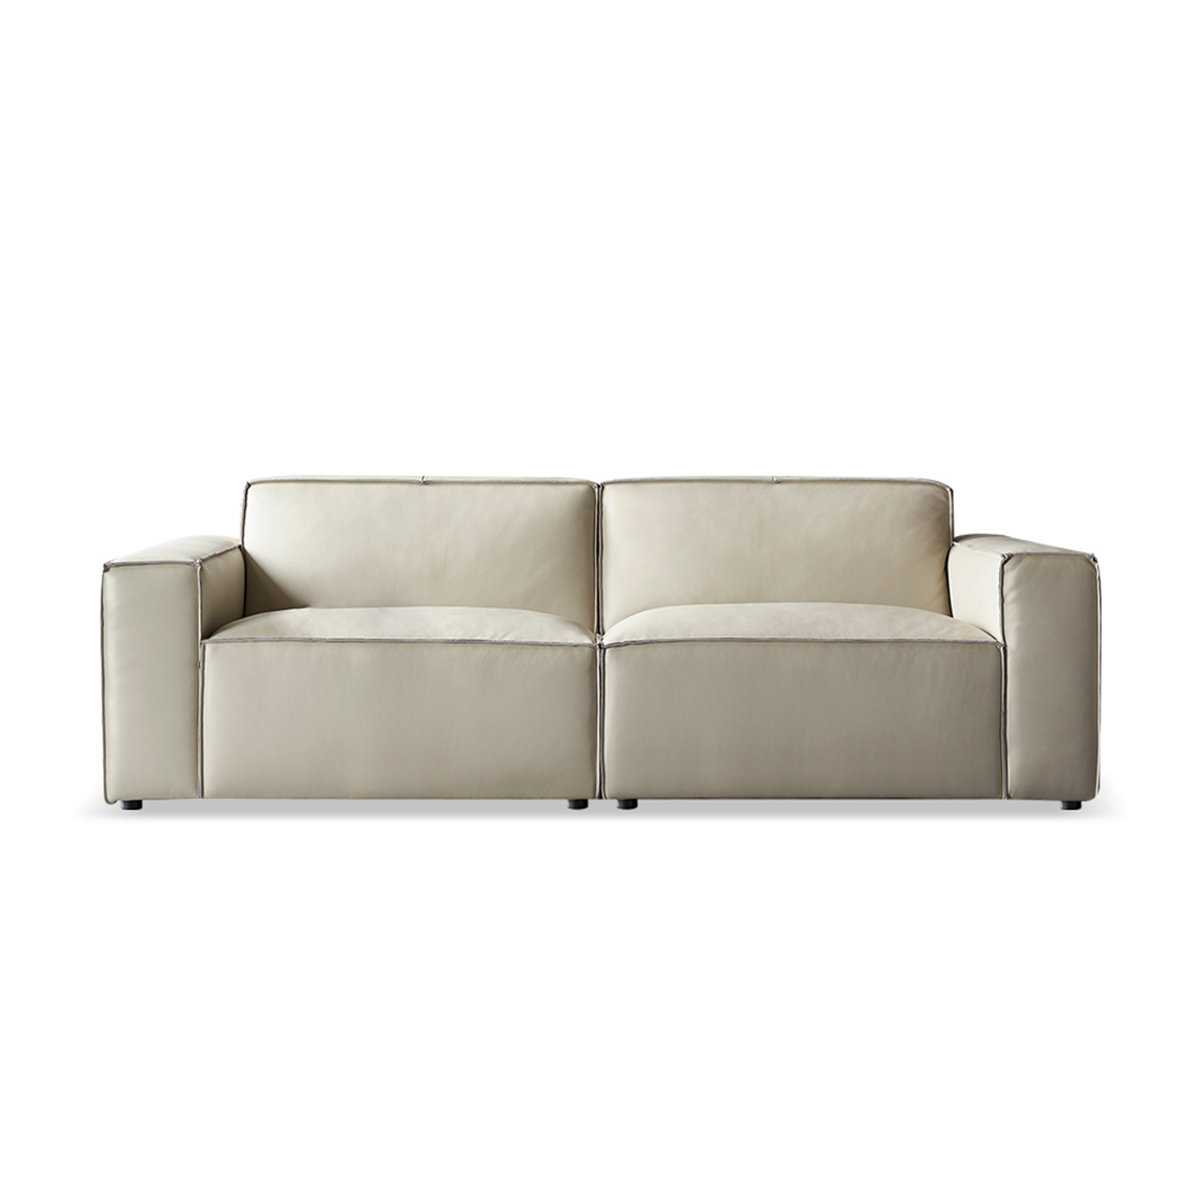 Leather Versus Fabric Sofa: Which One Is Better? – Megafurniture